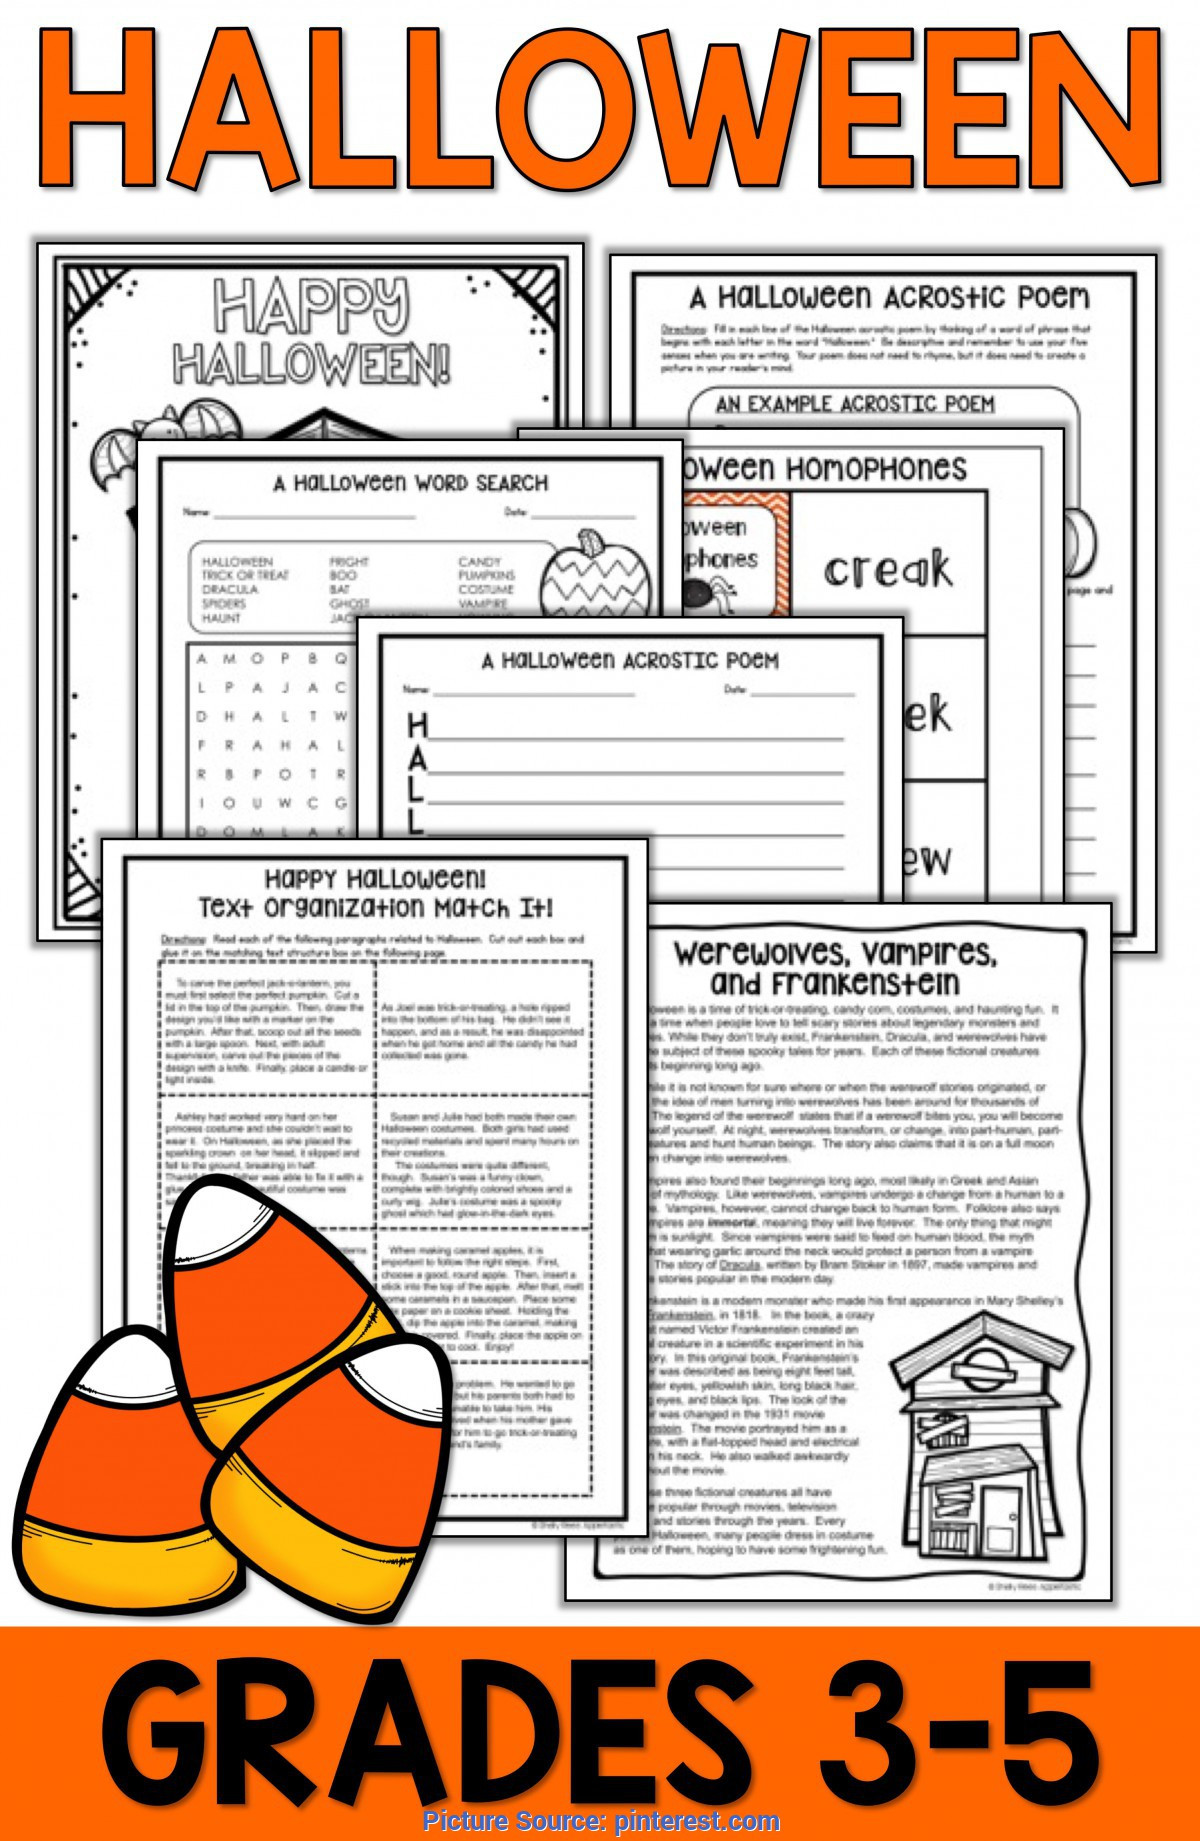 Halloween Lesson Plans Typical Simple Blank Lesson Plan Template Basic Lesson